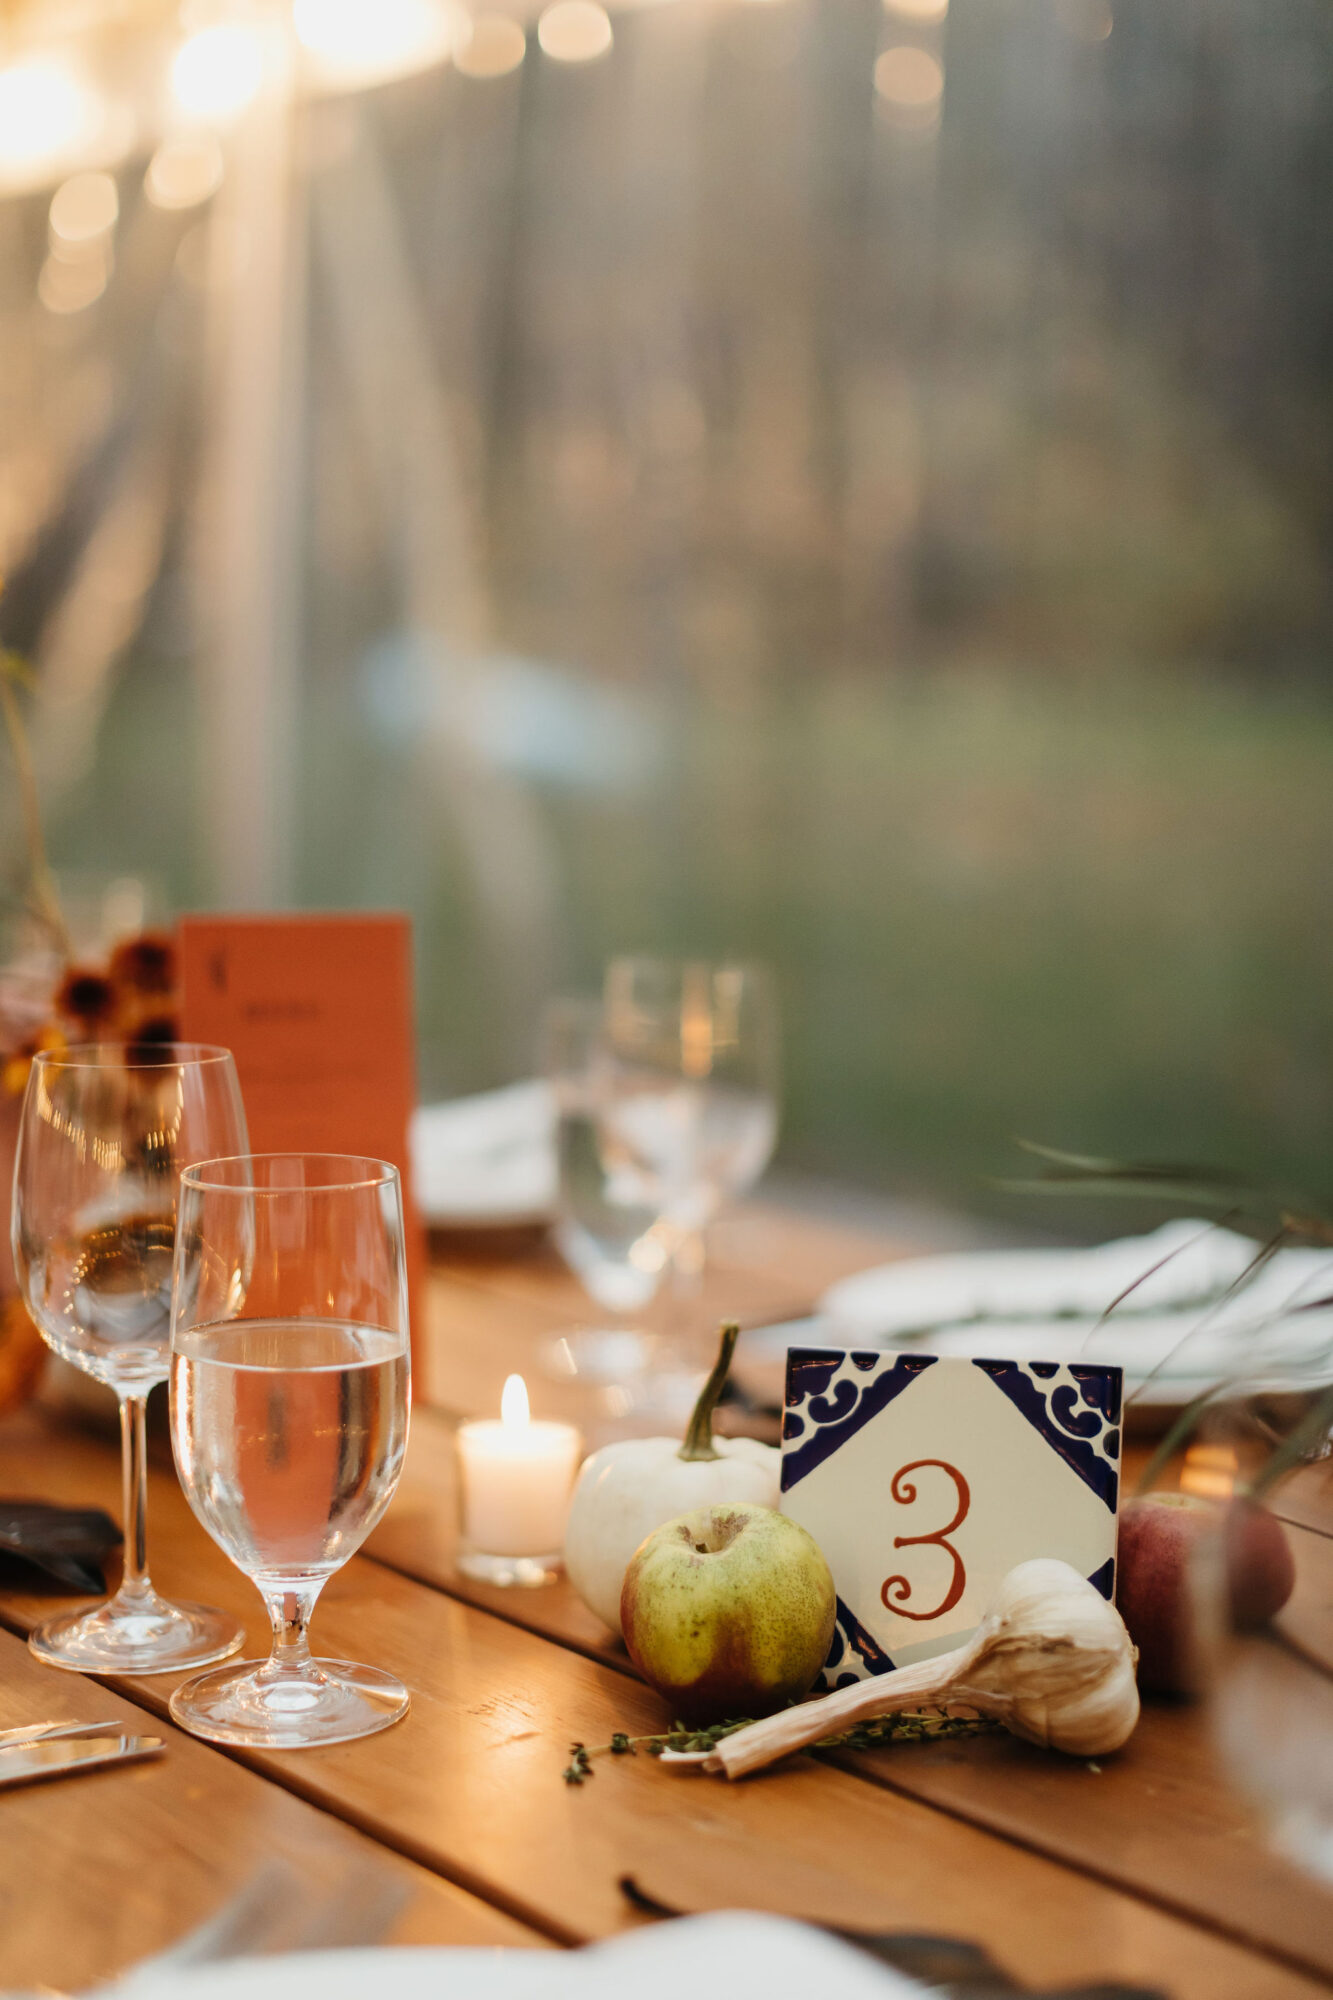 foxfire mountain house, catskill mountains, wedding, fall, clear tent, fall florals